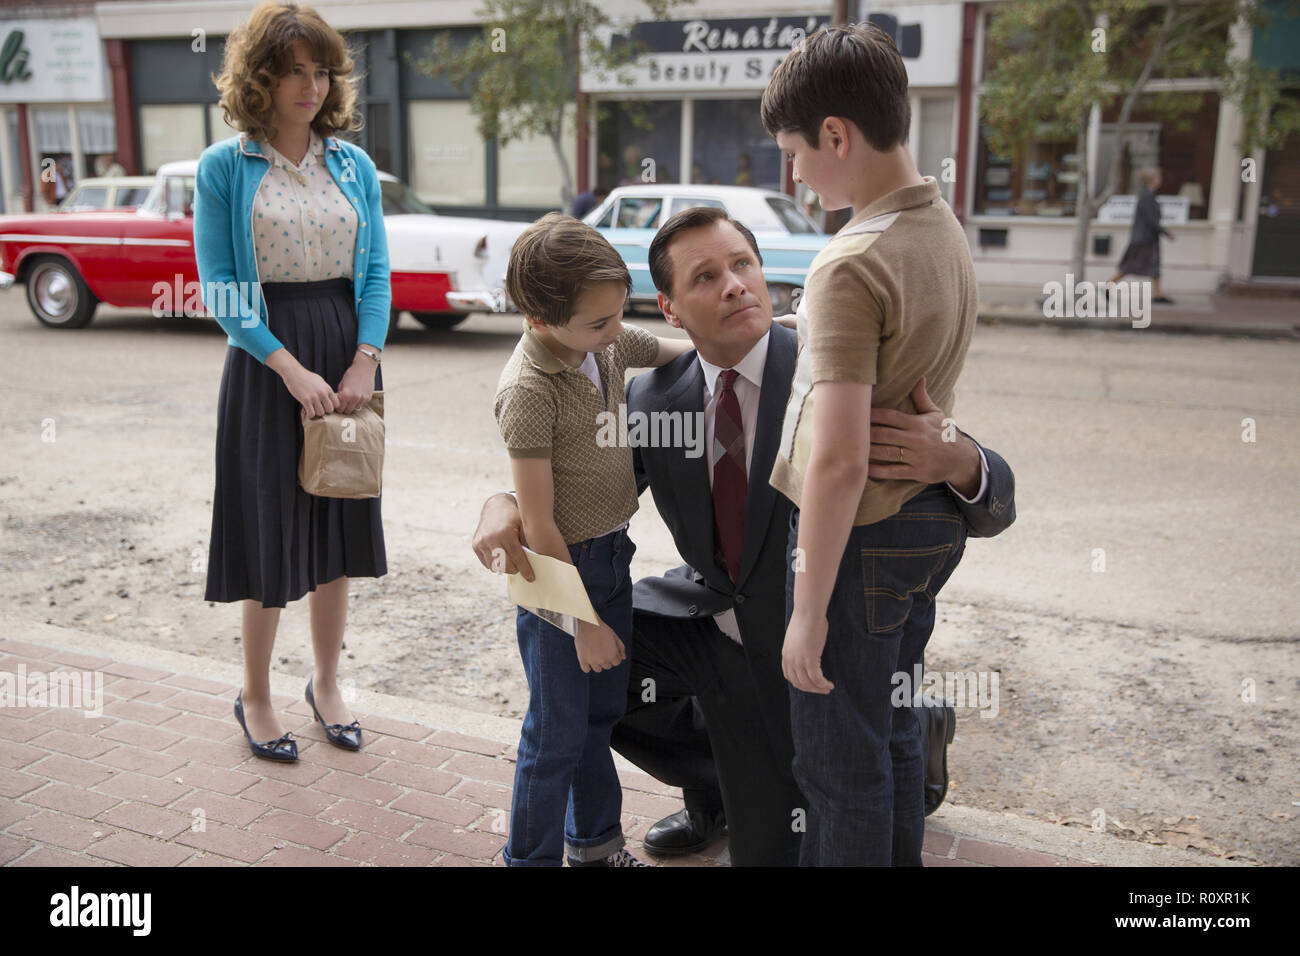 Dolores Vallelonga (Linda Cardellini, left) watches as her husband, Tony (Viggo Mortensen) says goodbye to their sons Frankie Vallelonga (Gavin Foley, left) and Nick Vallelonga (Hudson Galloway, right) in 'Green Book,' directed by Peter Farrelly. (2018) (Credit Photo: Universal Studios / The Hollywood Archive) Stock Photo